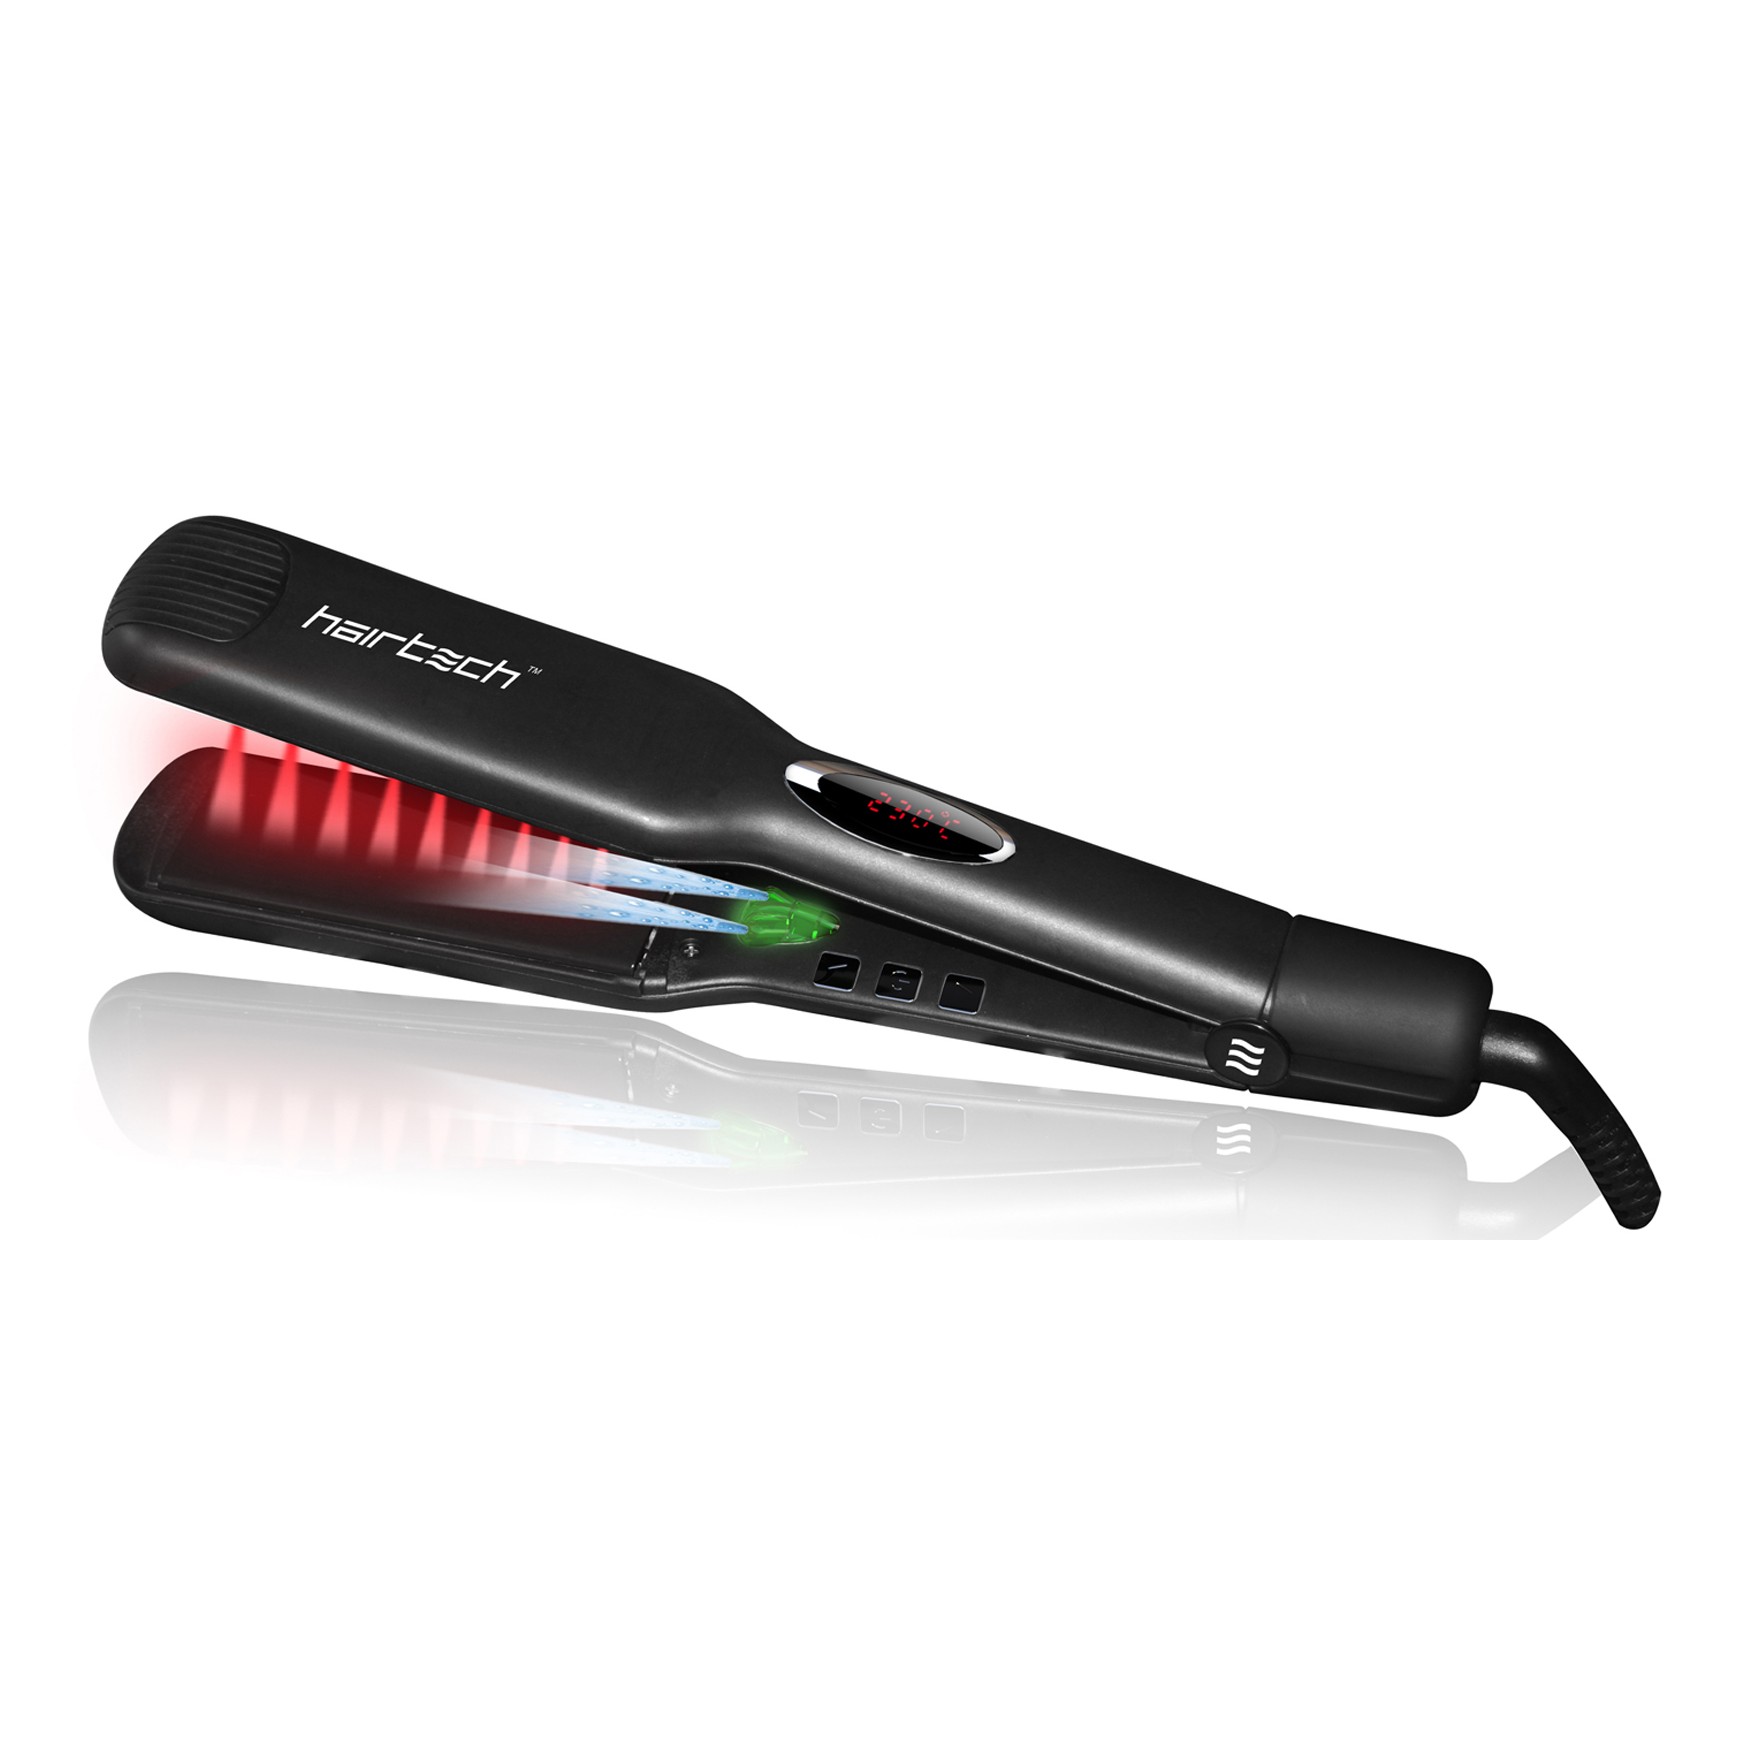 HAIRTECH-INFRARED HT089LARGE - με Υπέρυθρες και Ιονιστή 800189-0